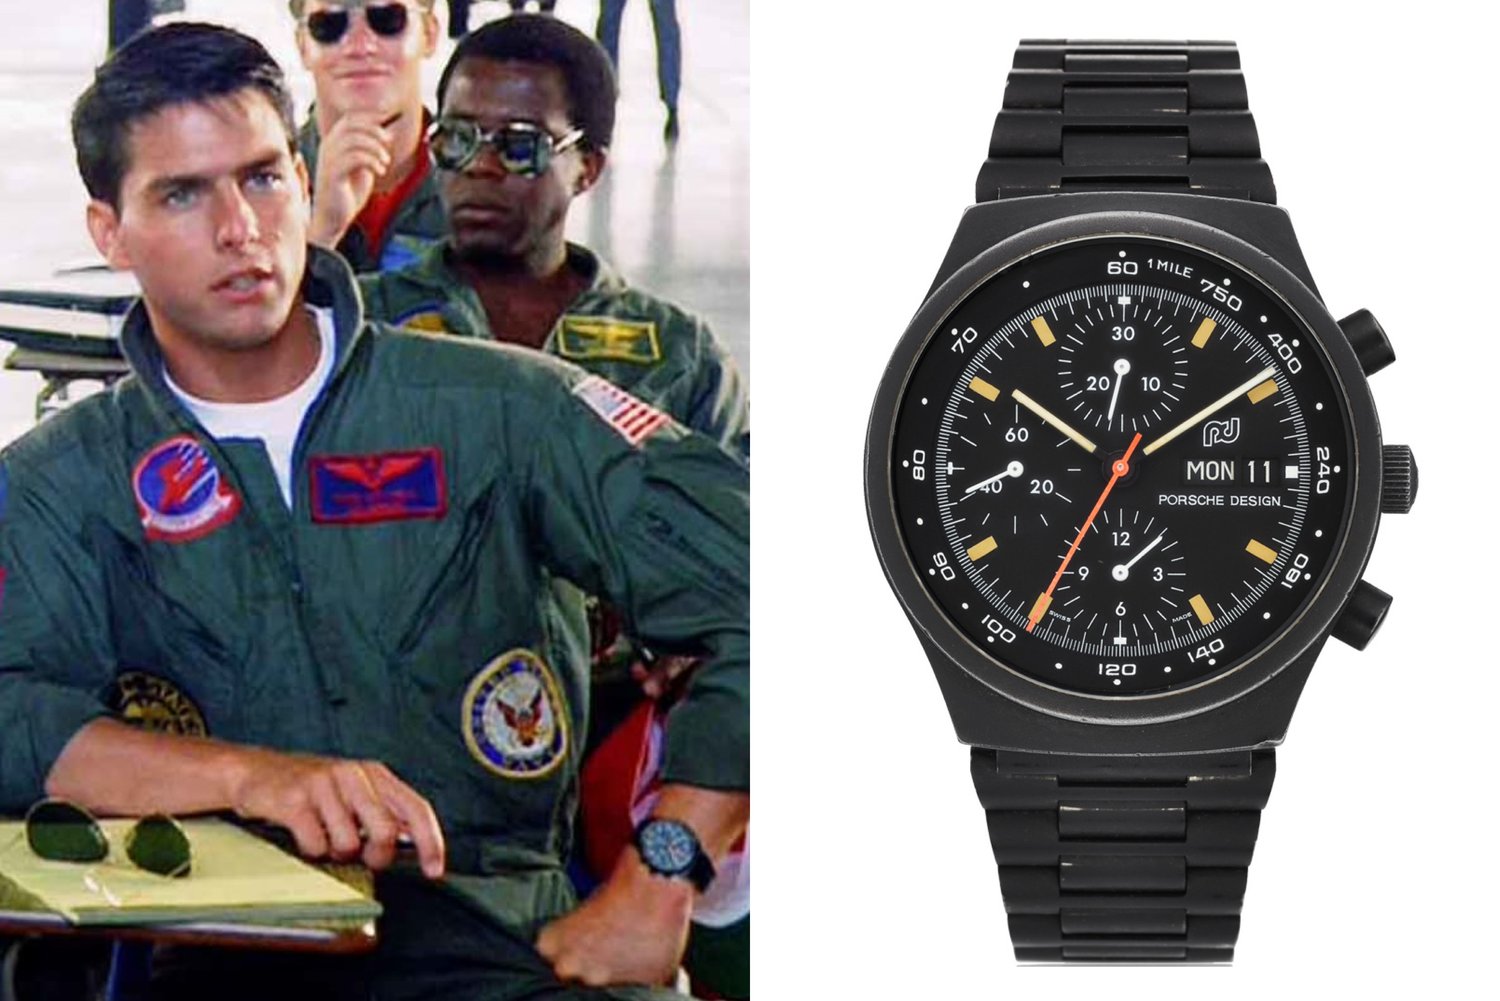 Tom Cruise's Watch Collection - Rolex, Cartier, Porsche Design and More ...